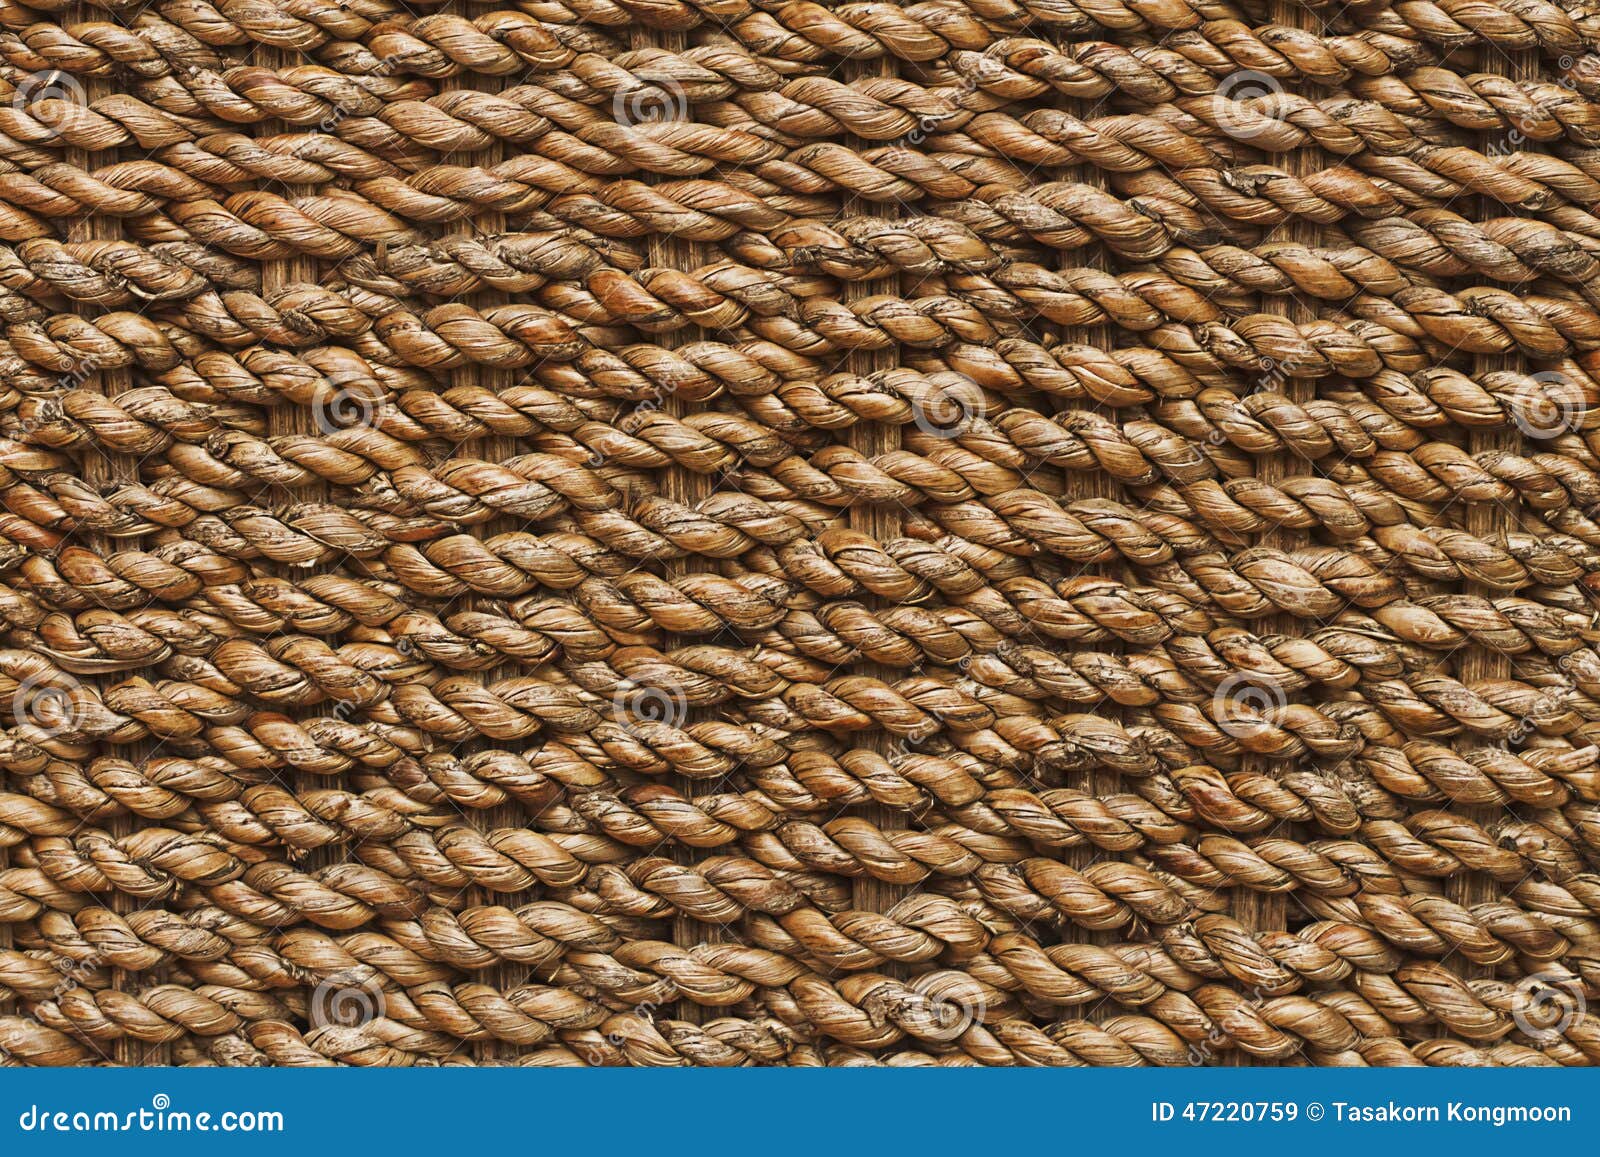 Hemp Rope Texture for Pattern and Background Stock Image - Image of hemp,  rattan: 47220759